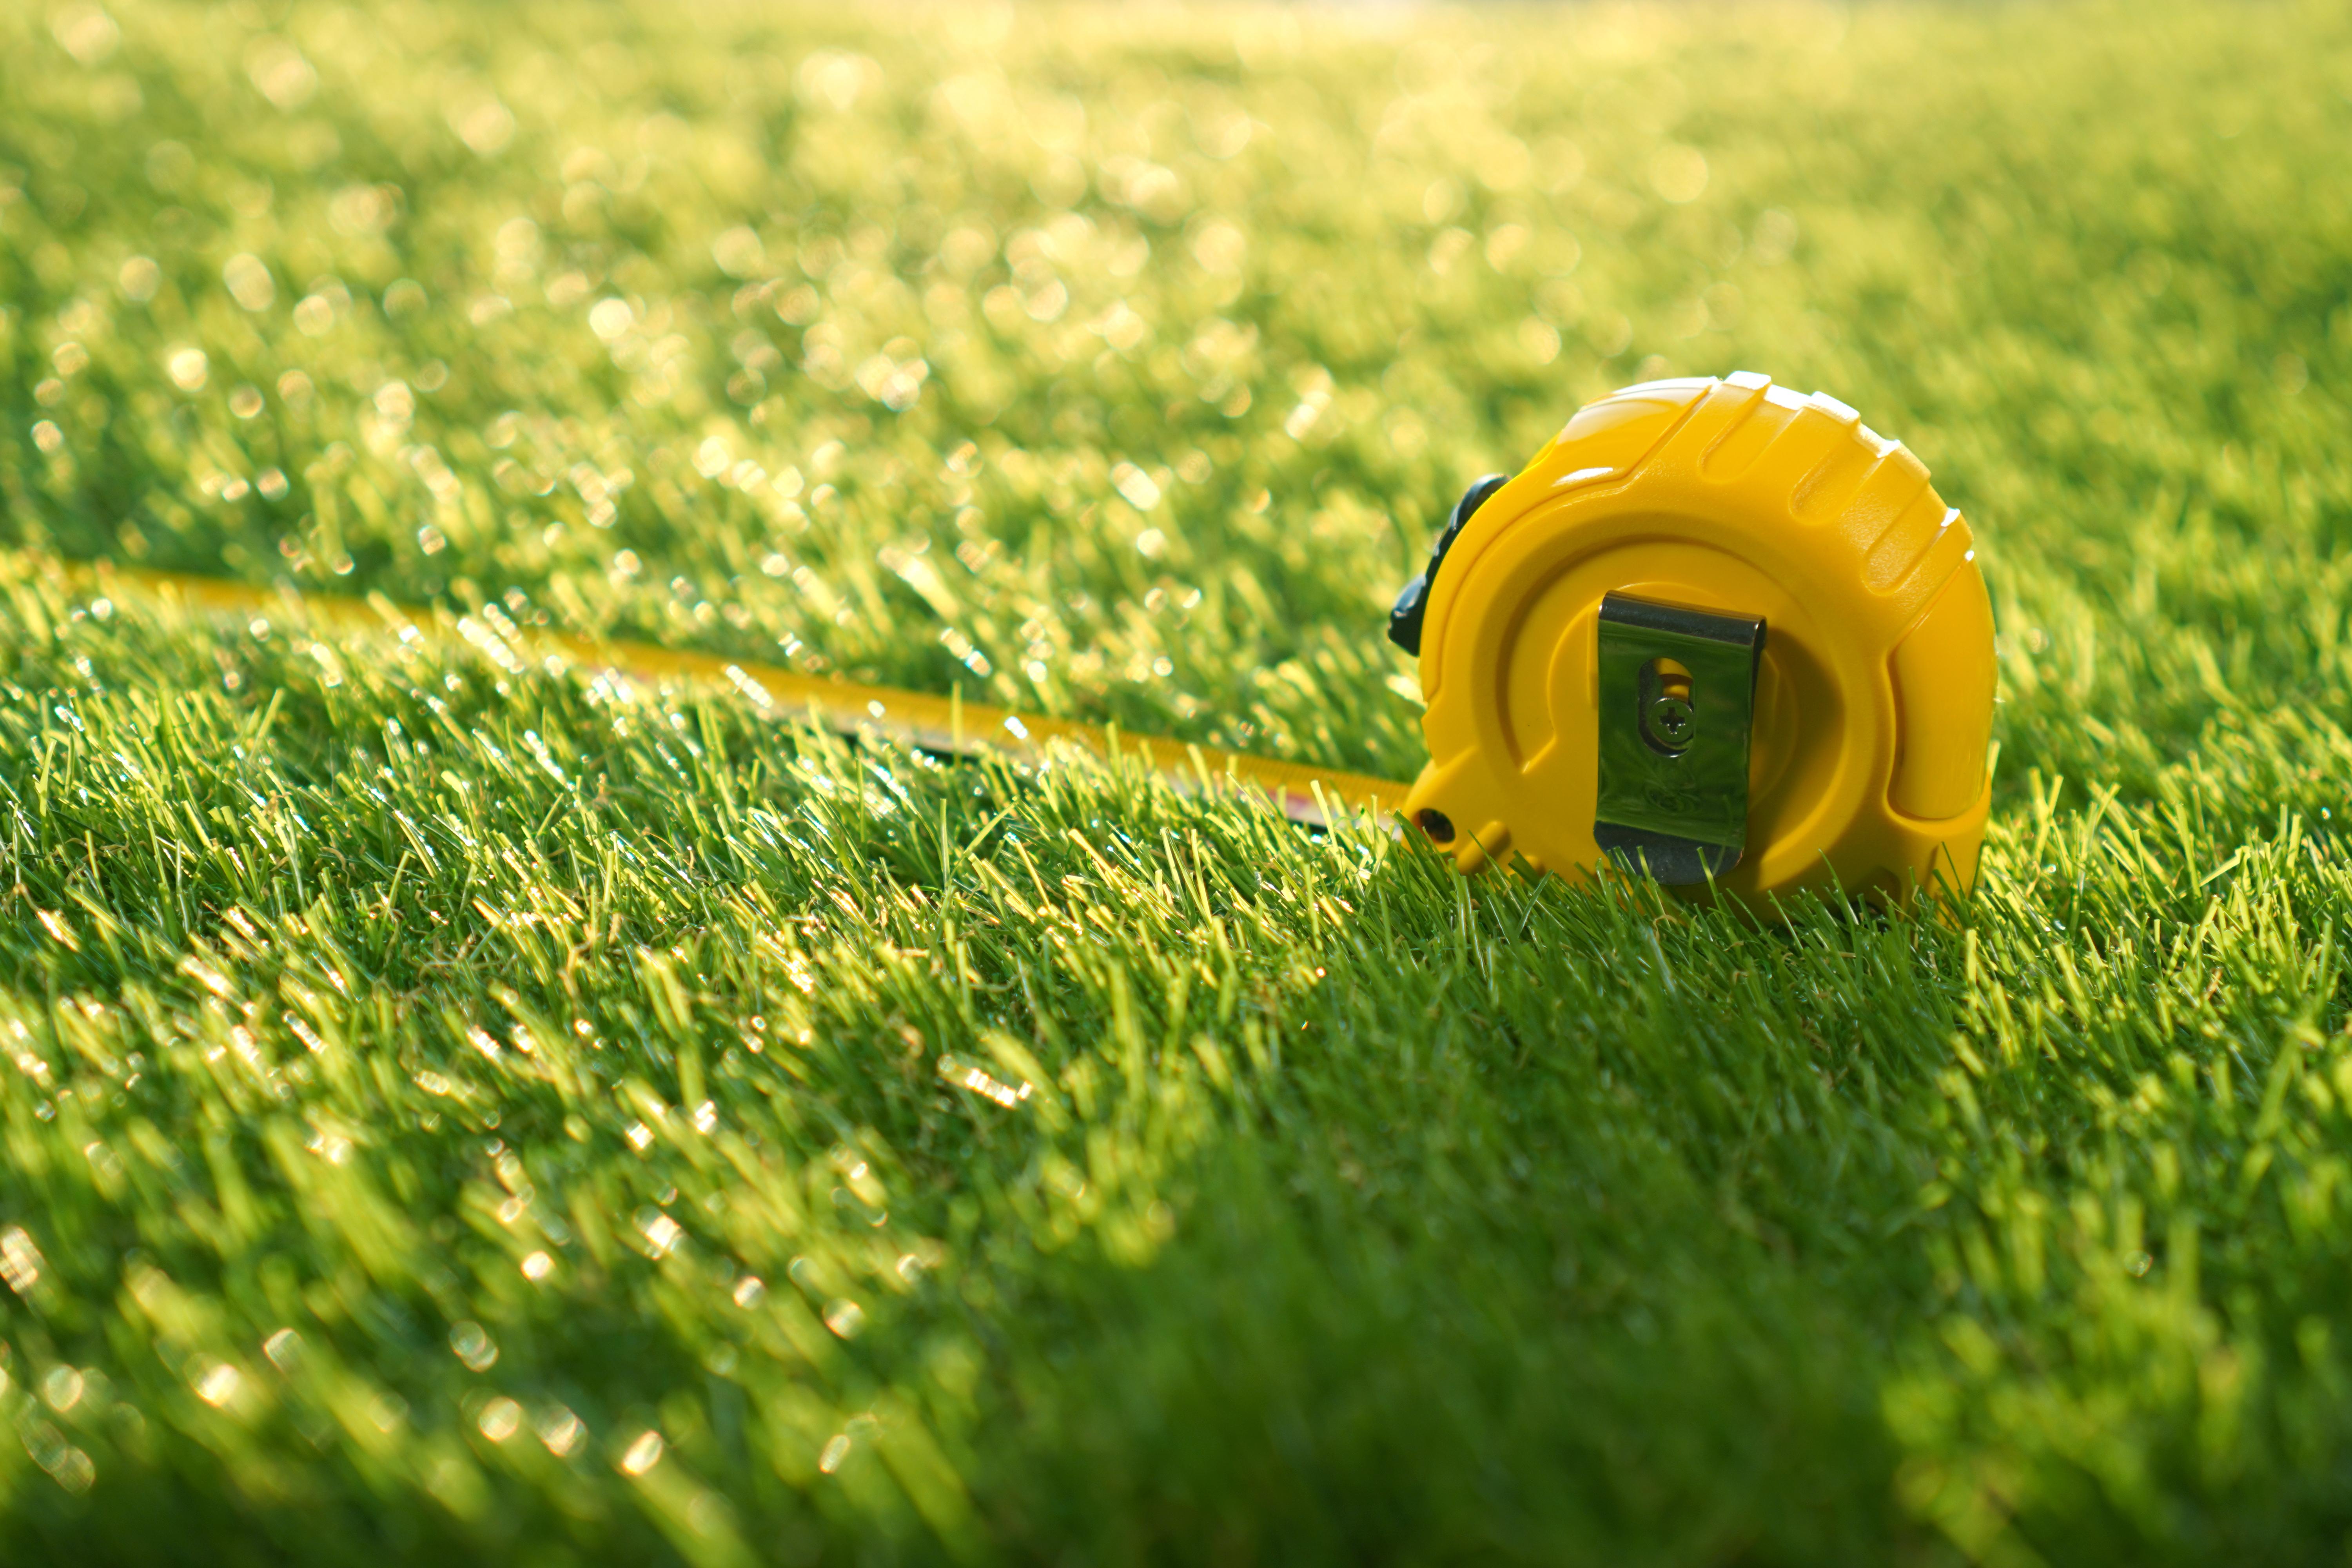 How to Calculate How Much Artificial Turf You Need